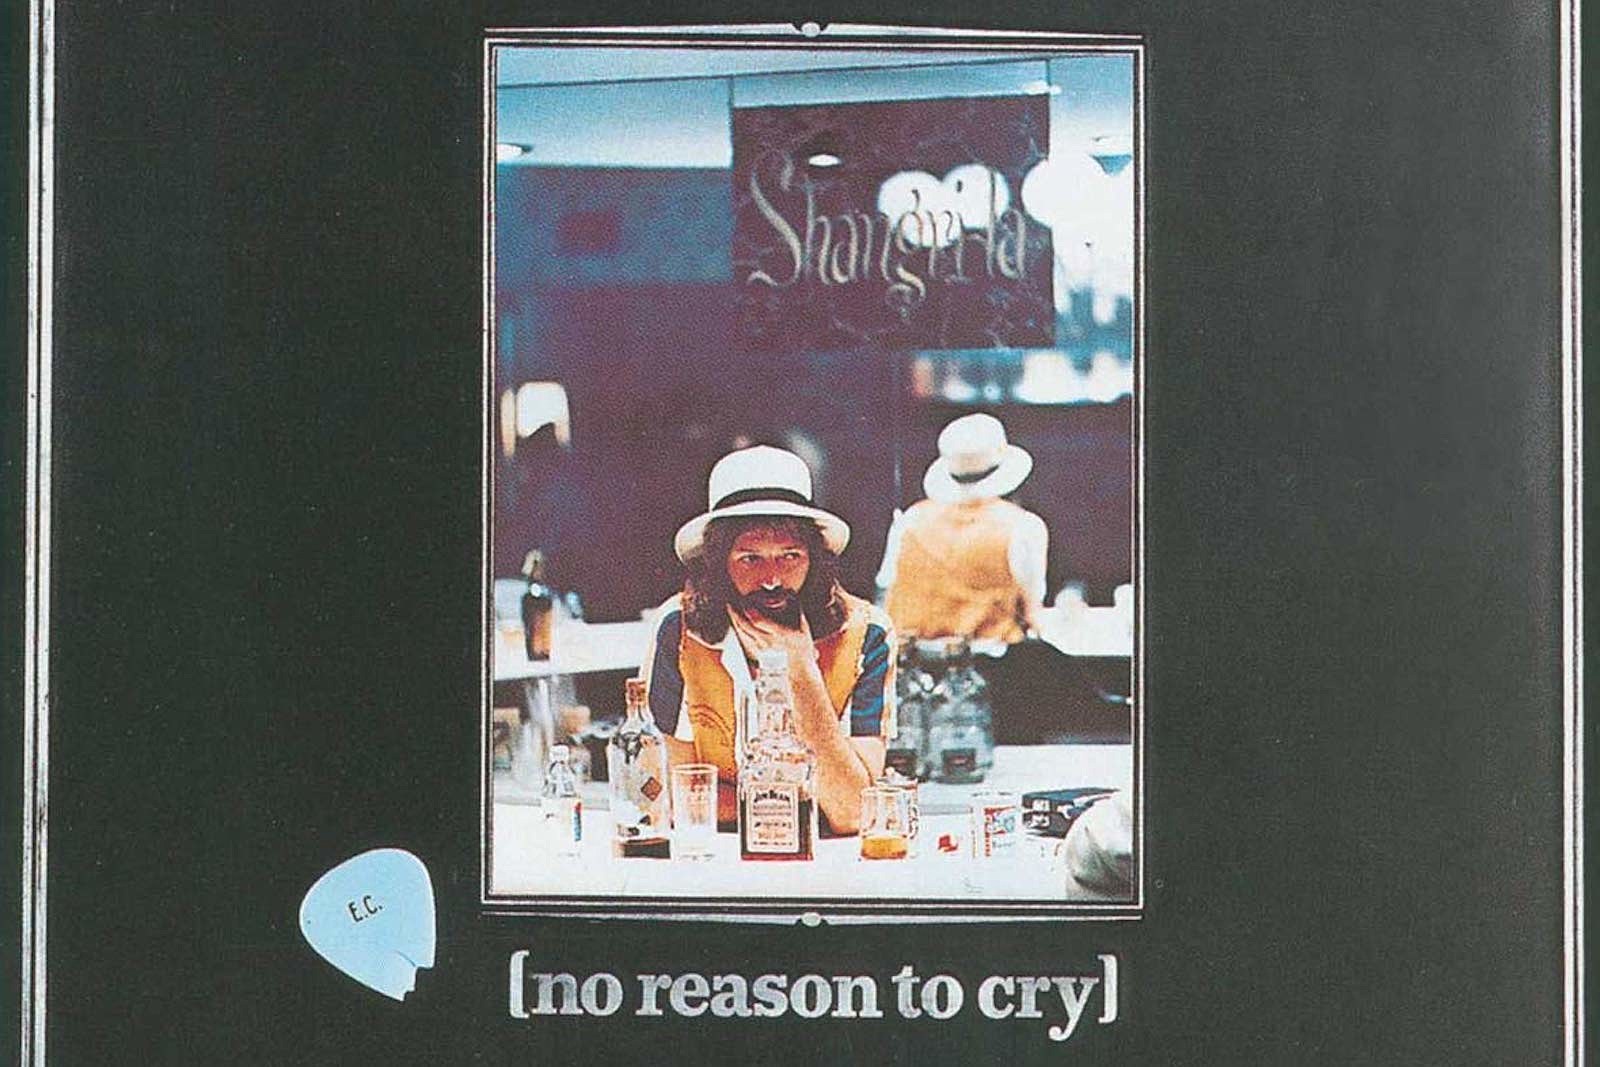 When Eric Clapton Enlisted the Band for 'No Reason to Cry